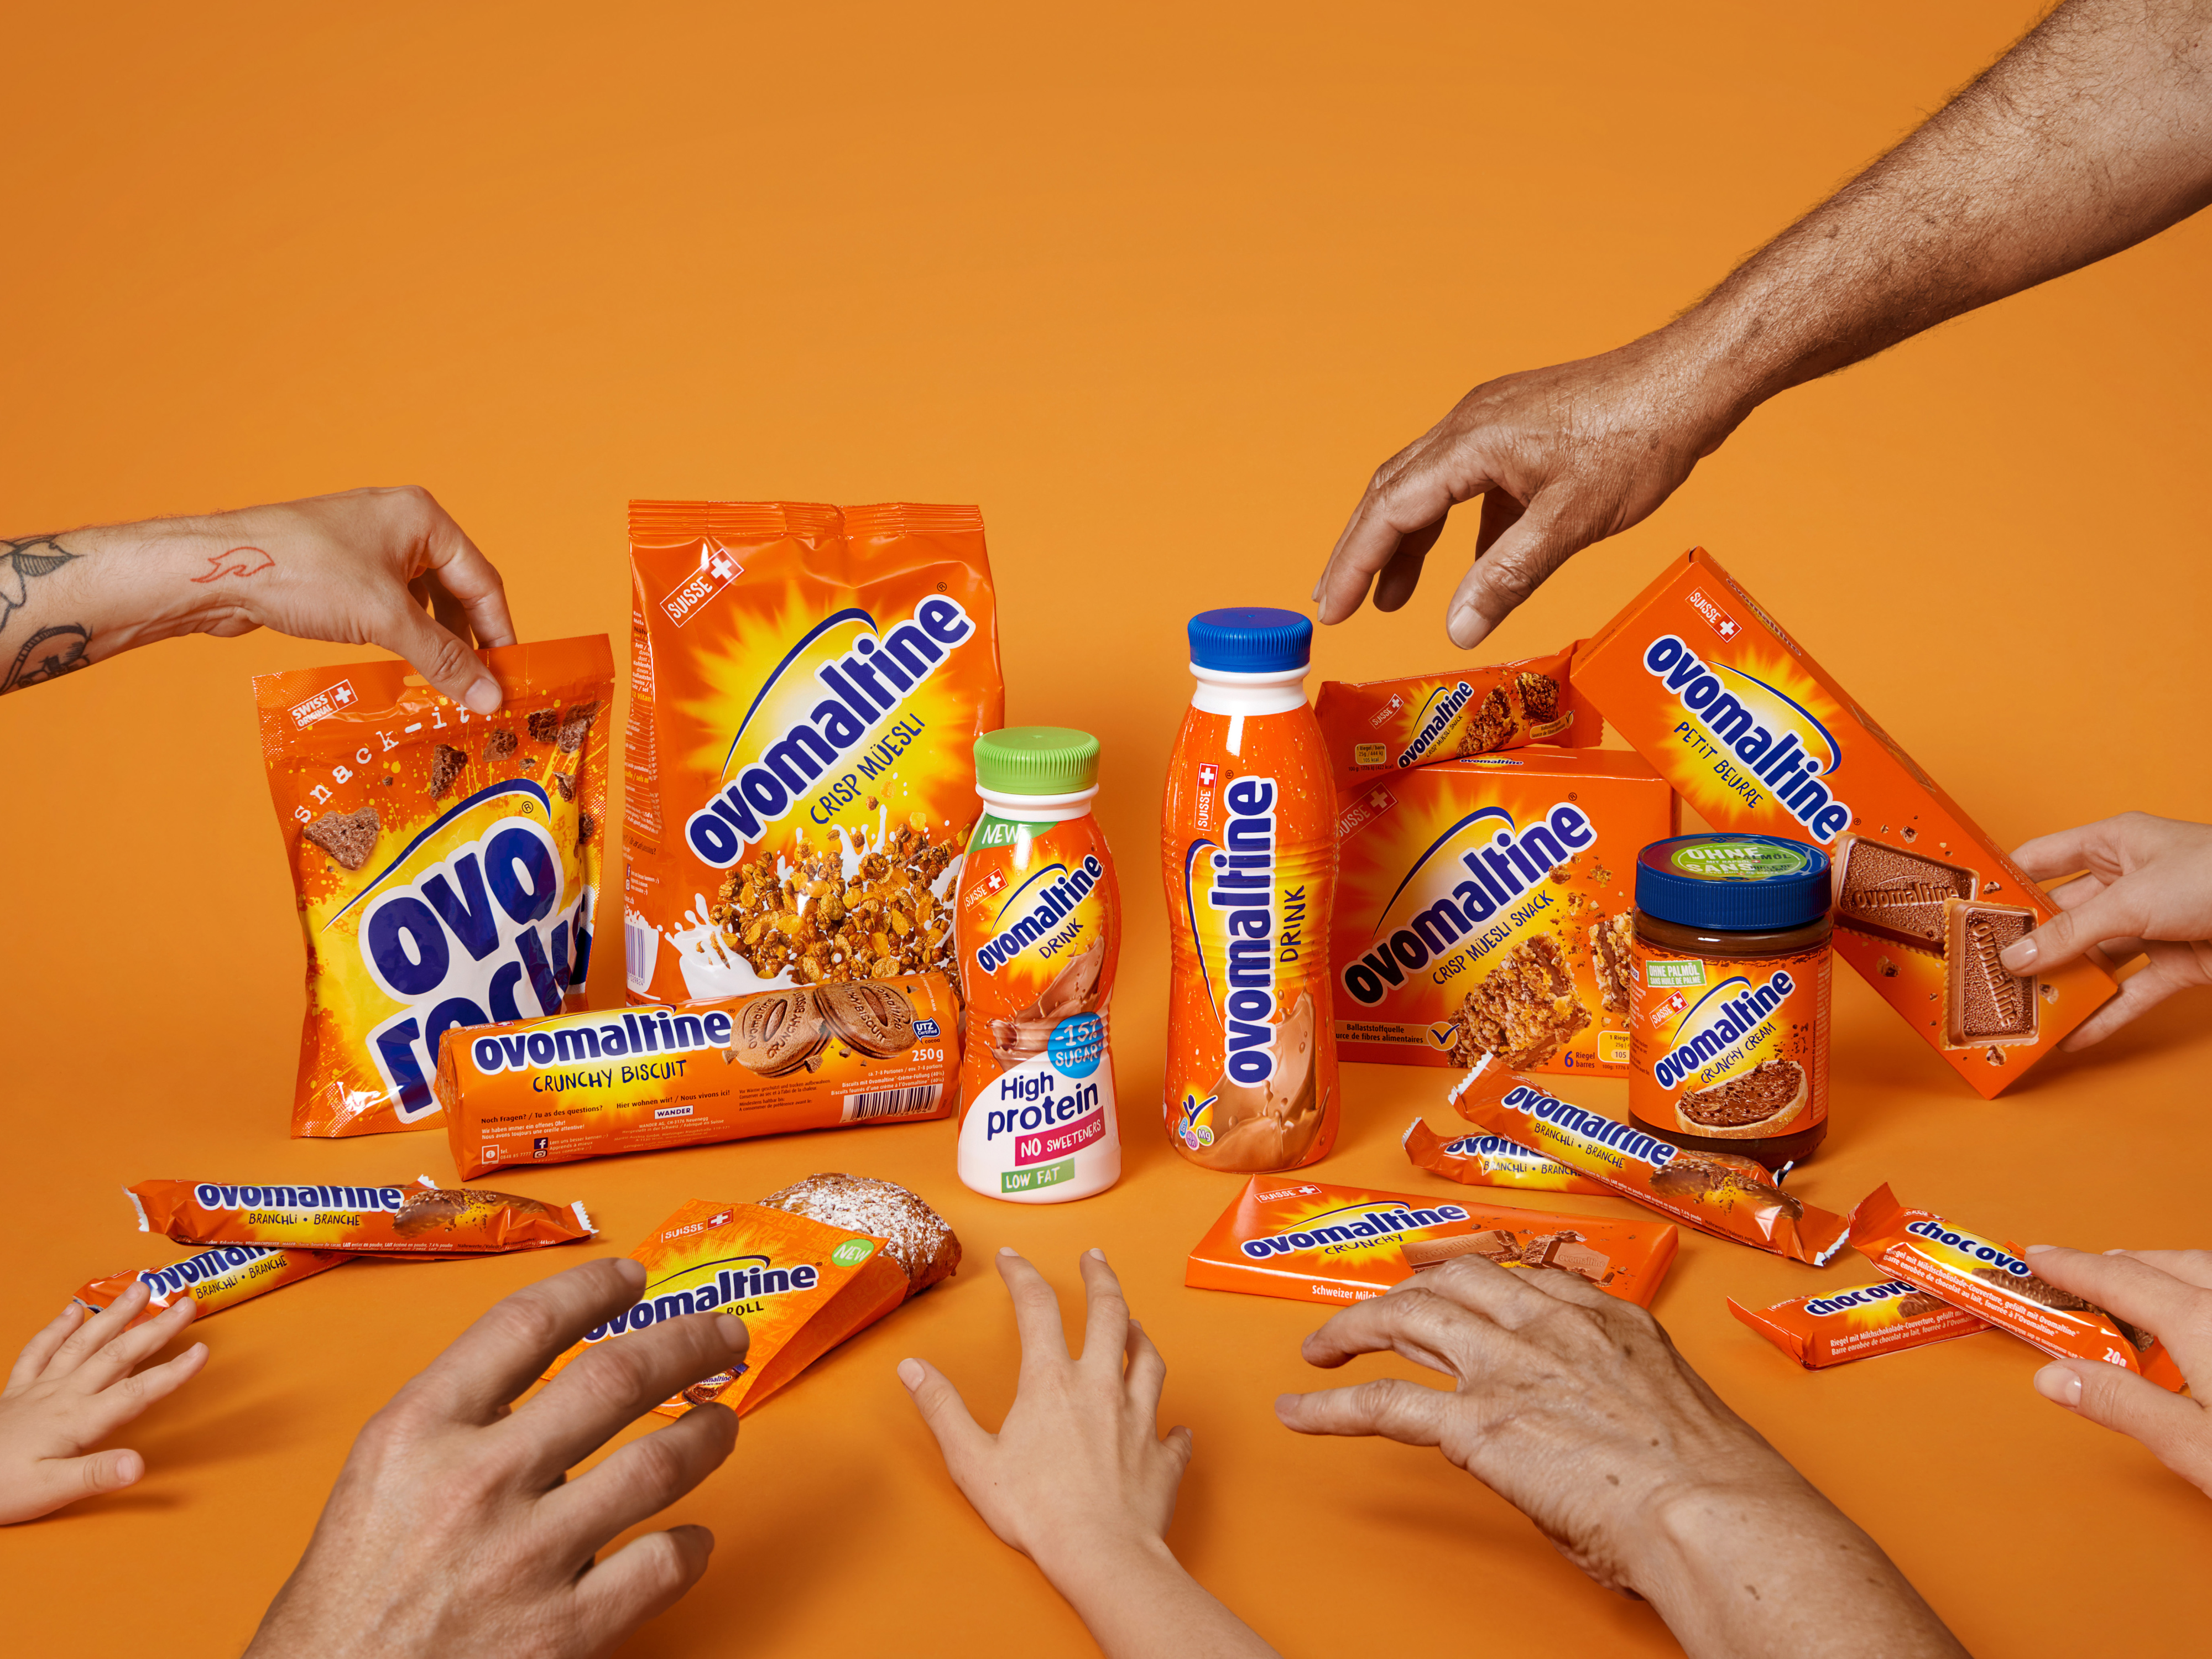 Pictures of a product image from BLISH for Ovomaltine. Hands are reaching for the different products in front of an orange background.